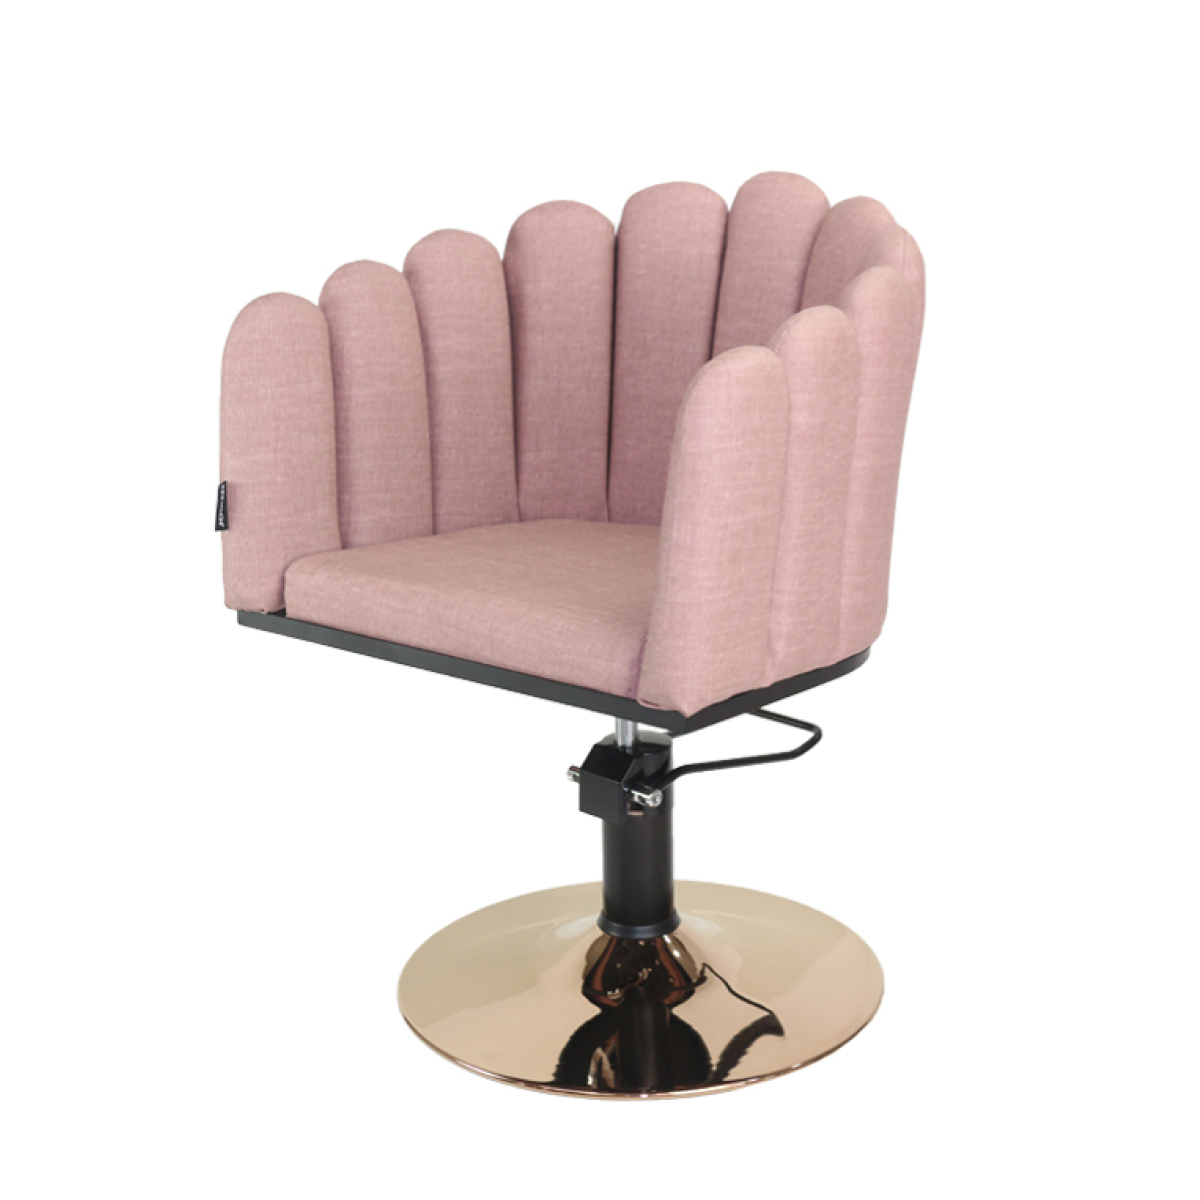 Penelope Dusty Pink Styling Chair - Gold Disc Base